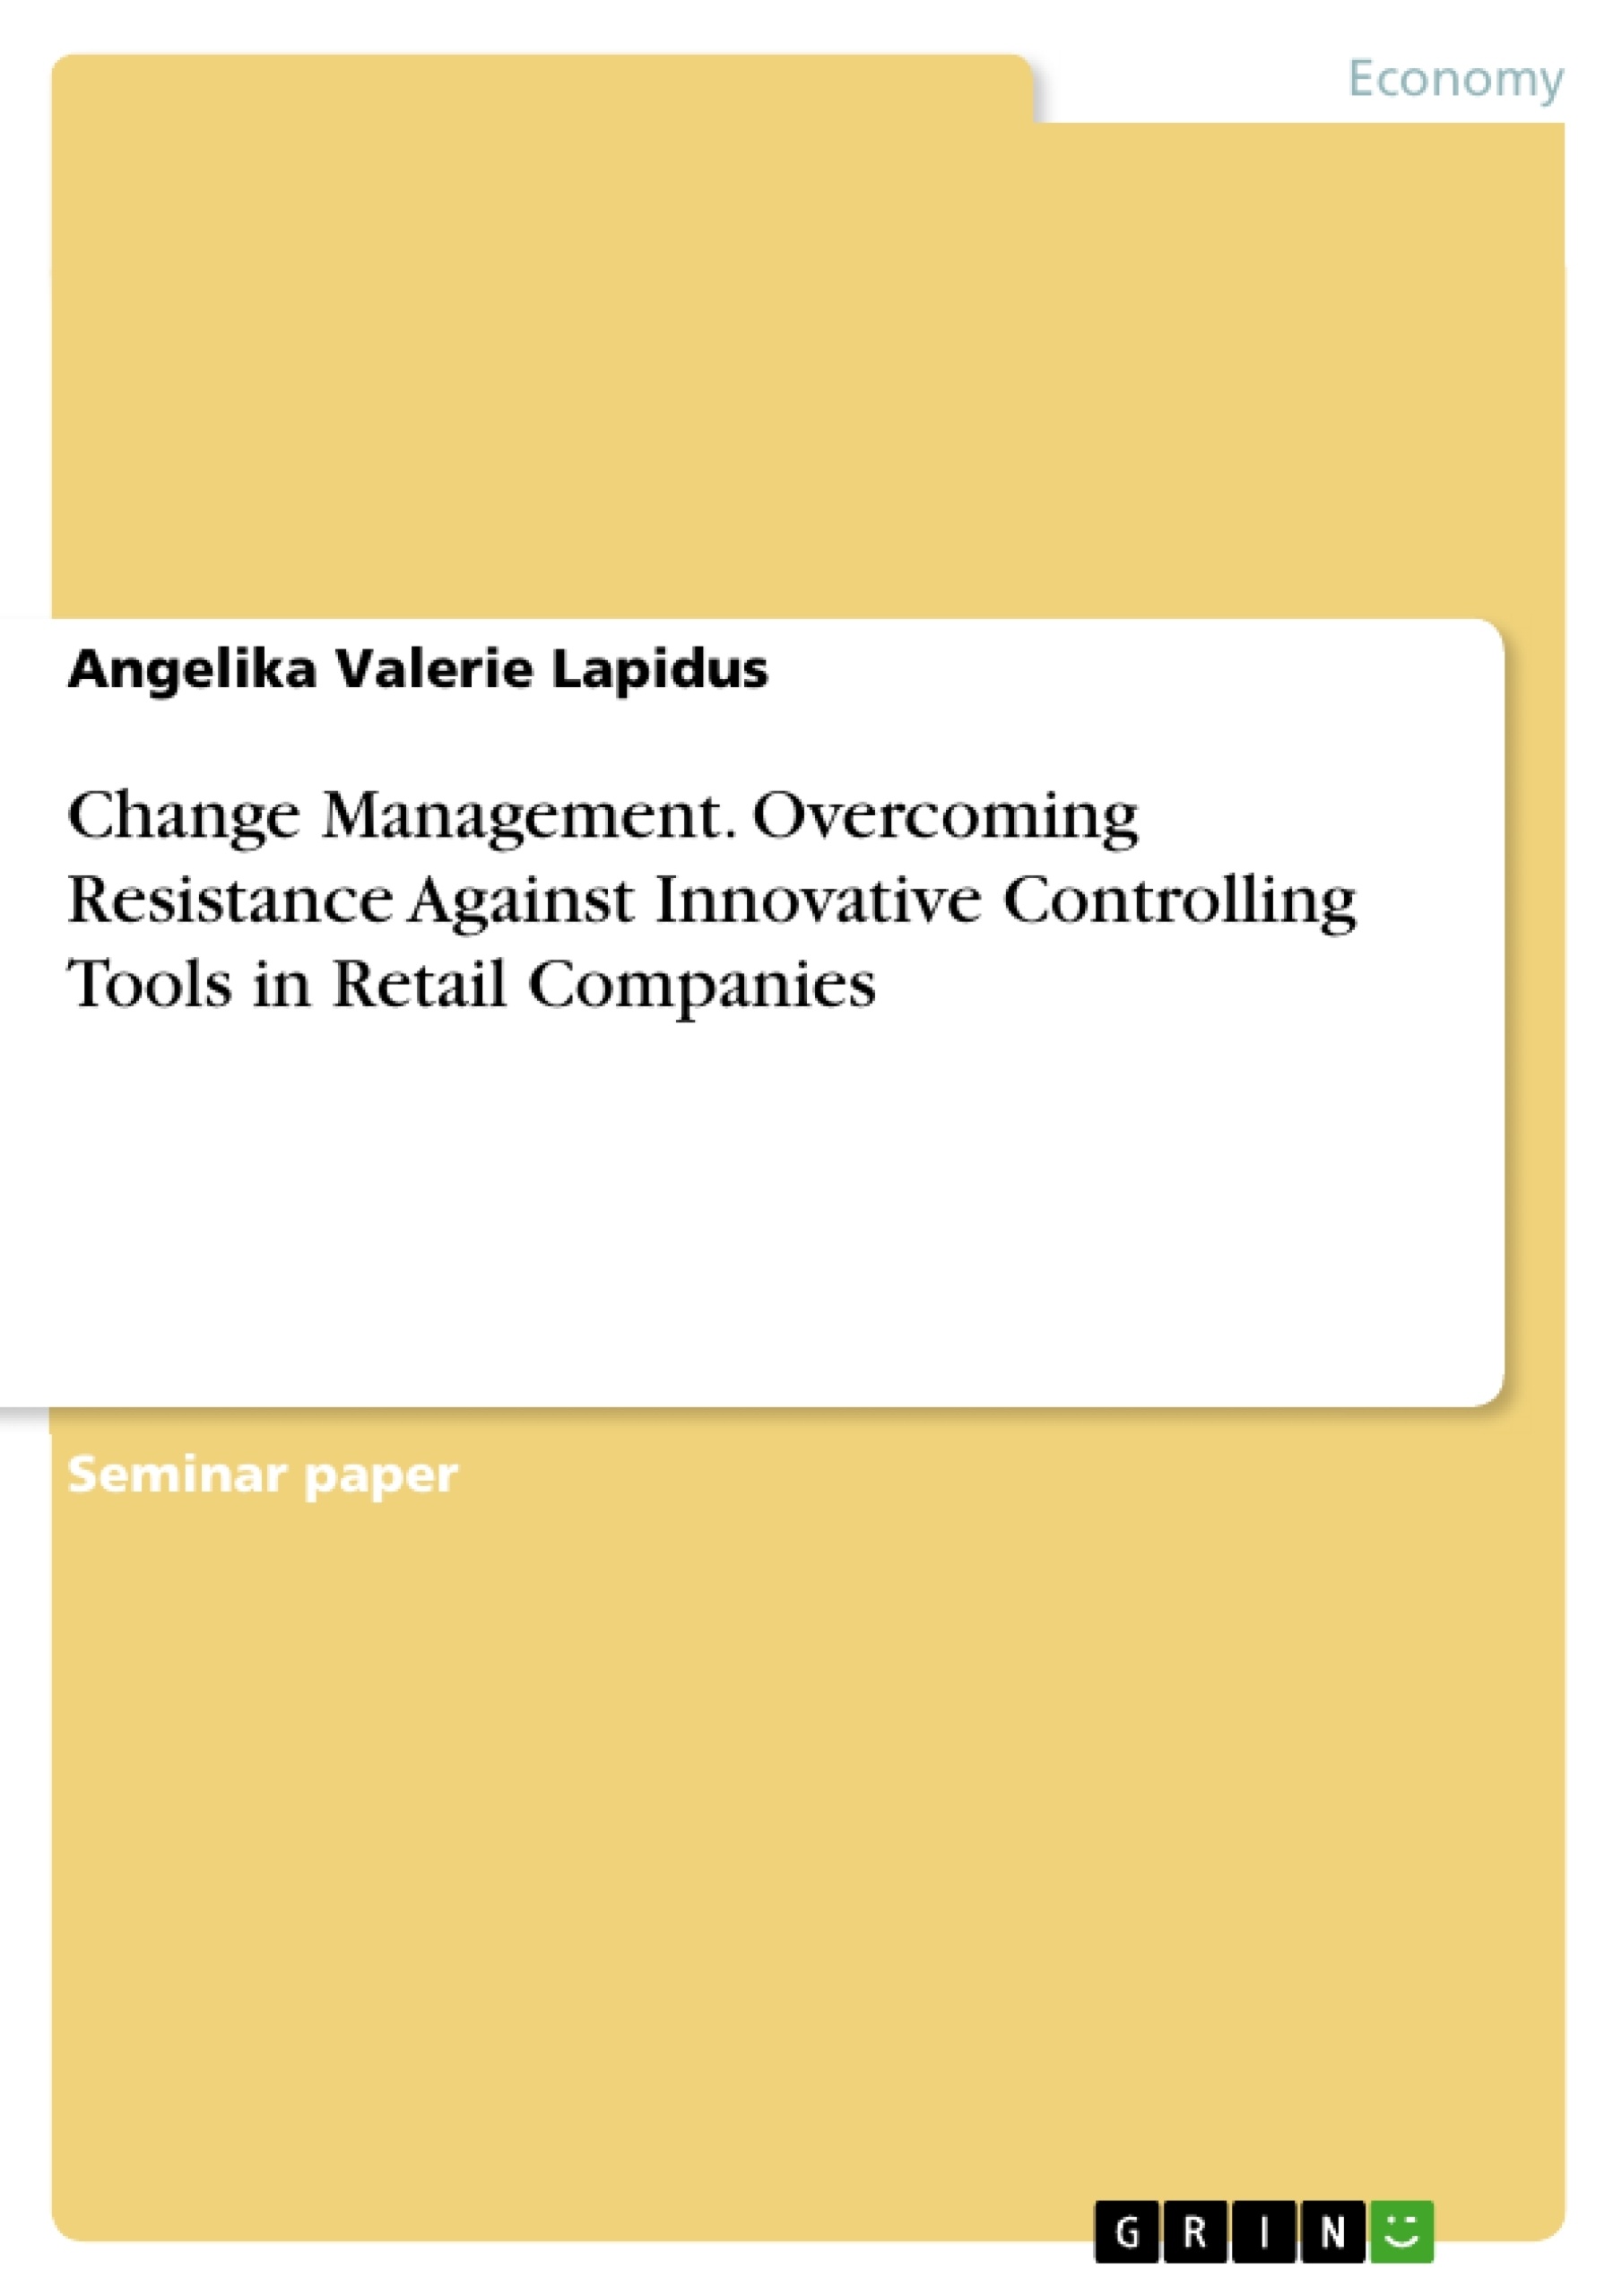 Title: Change Management: Overcoming Resistance Against Innovative Controlling Tools in Retail Companies